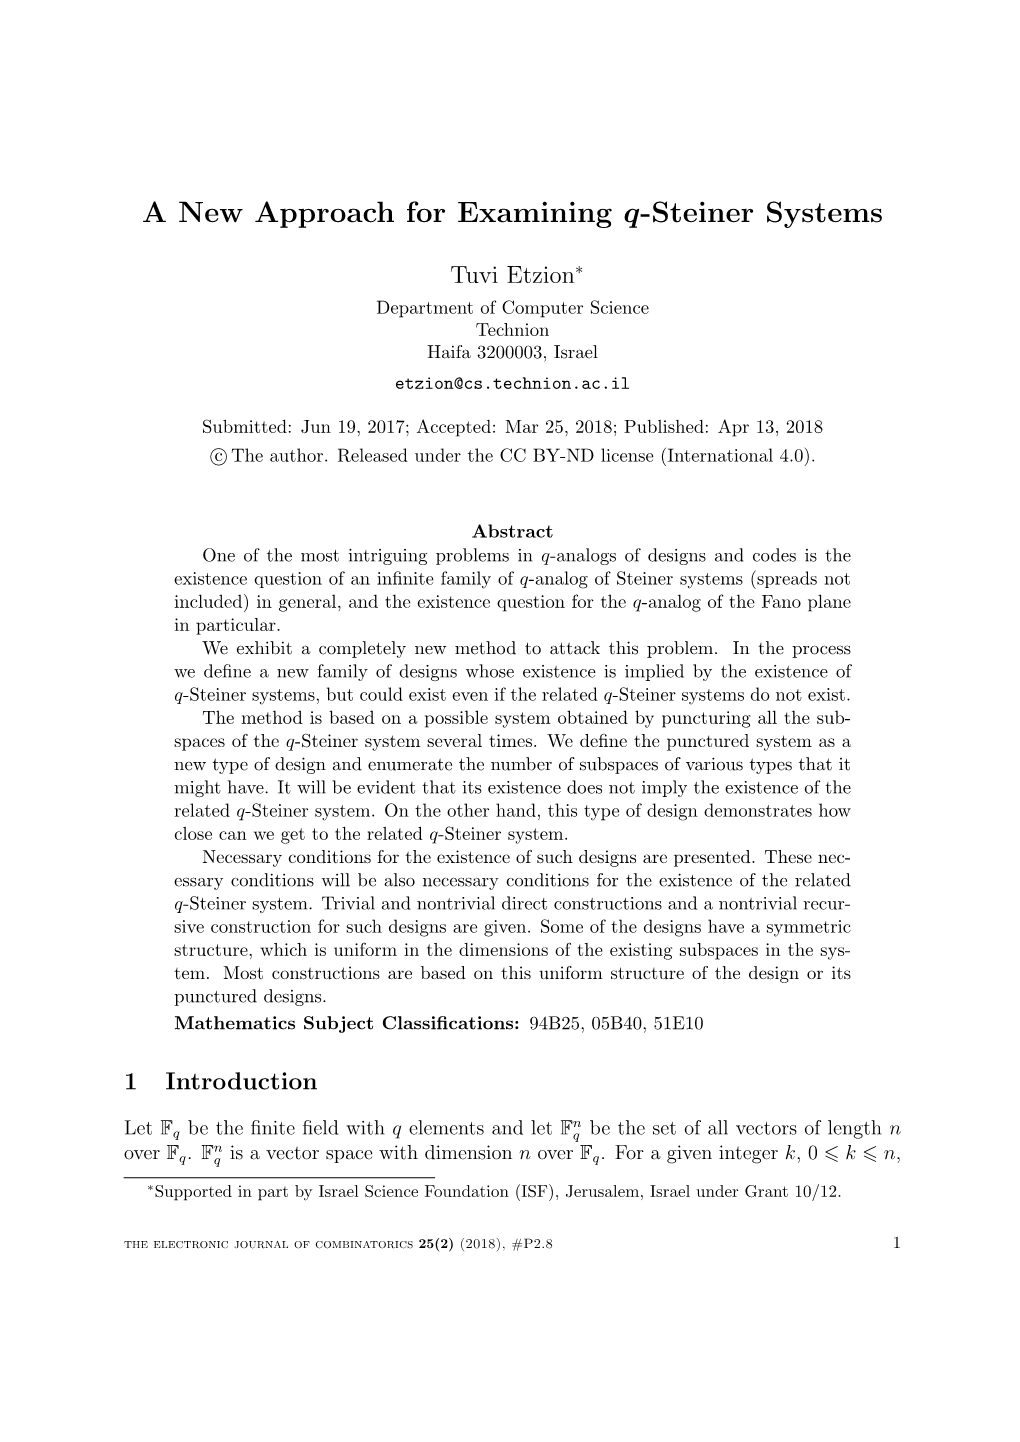 A New Approach for Examining Q-Steiner Systems